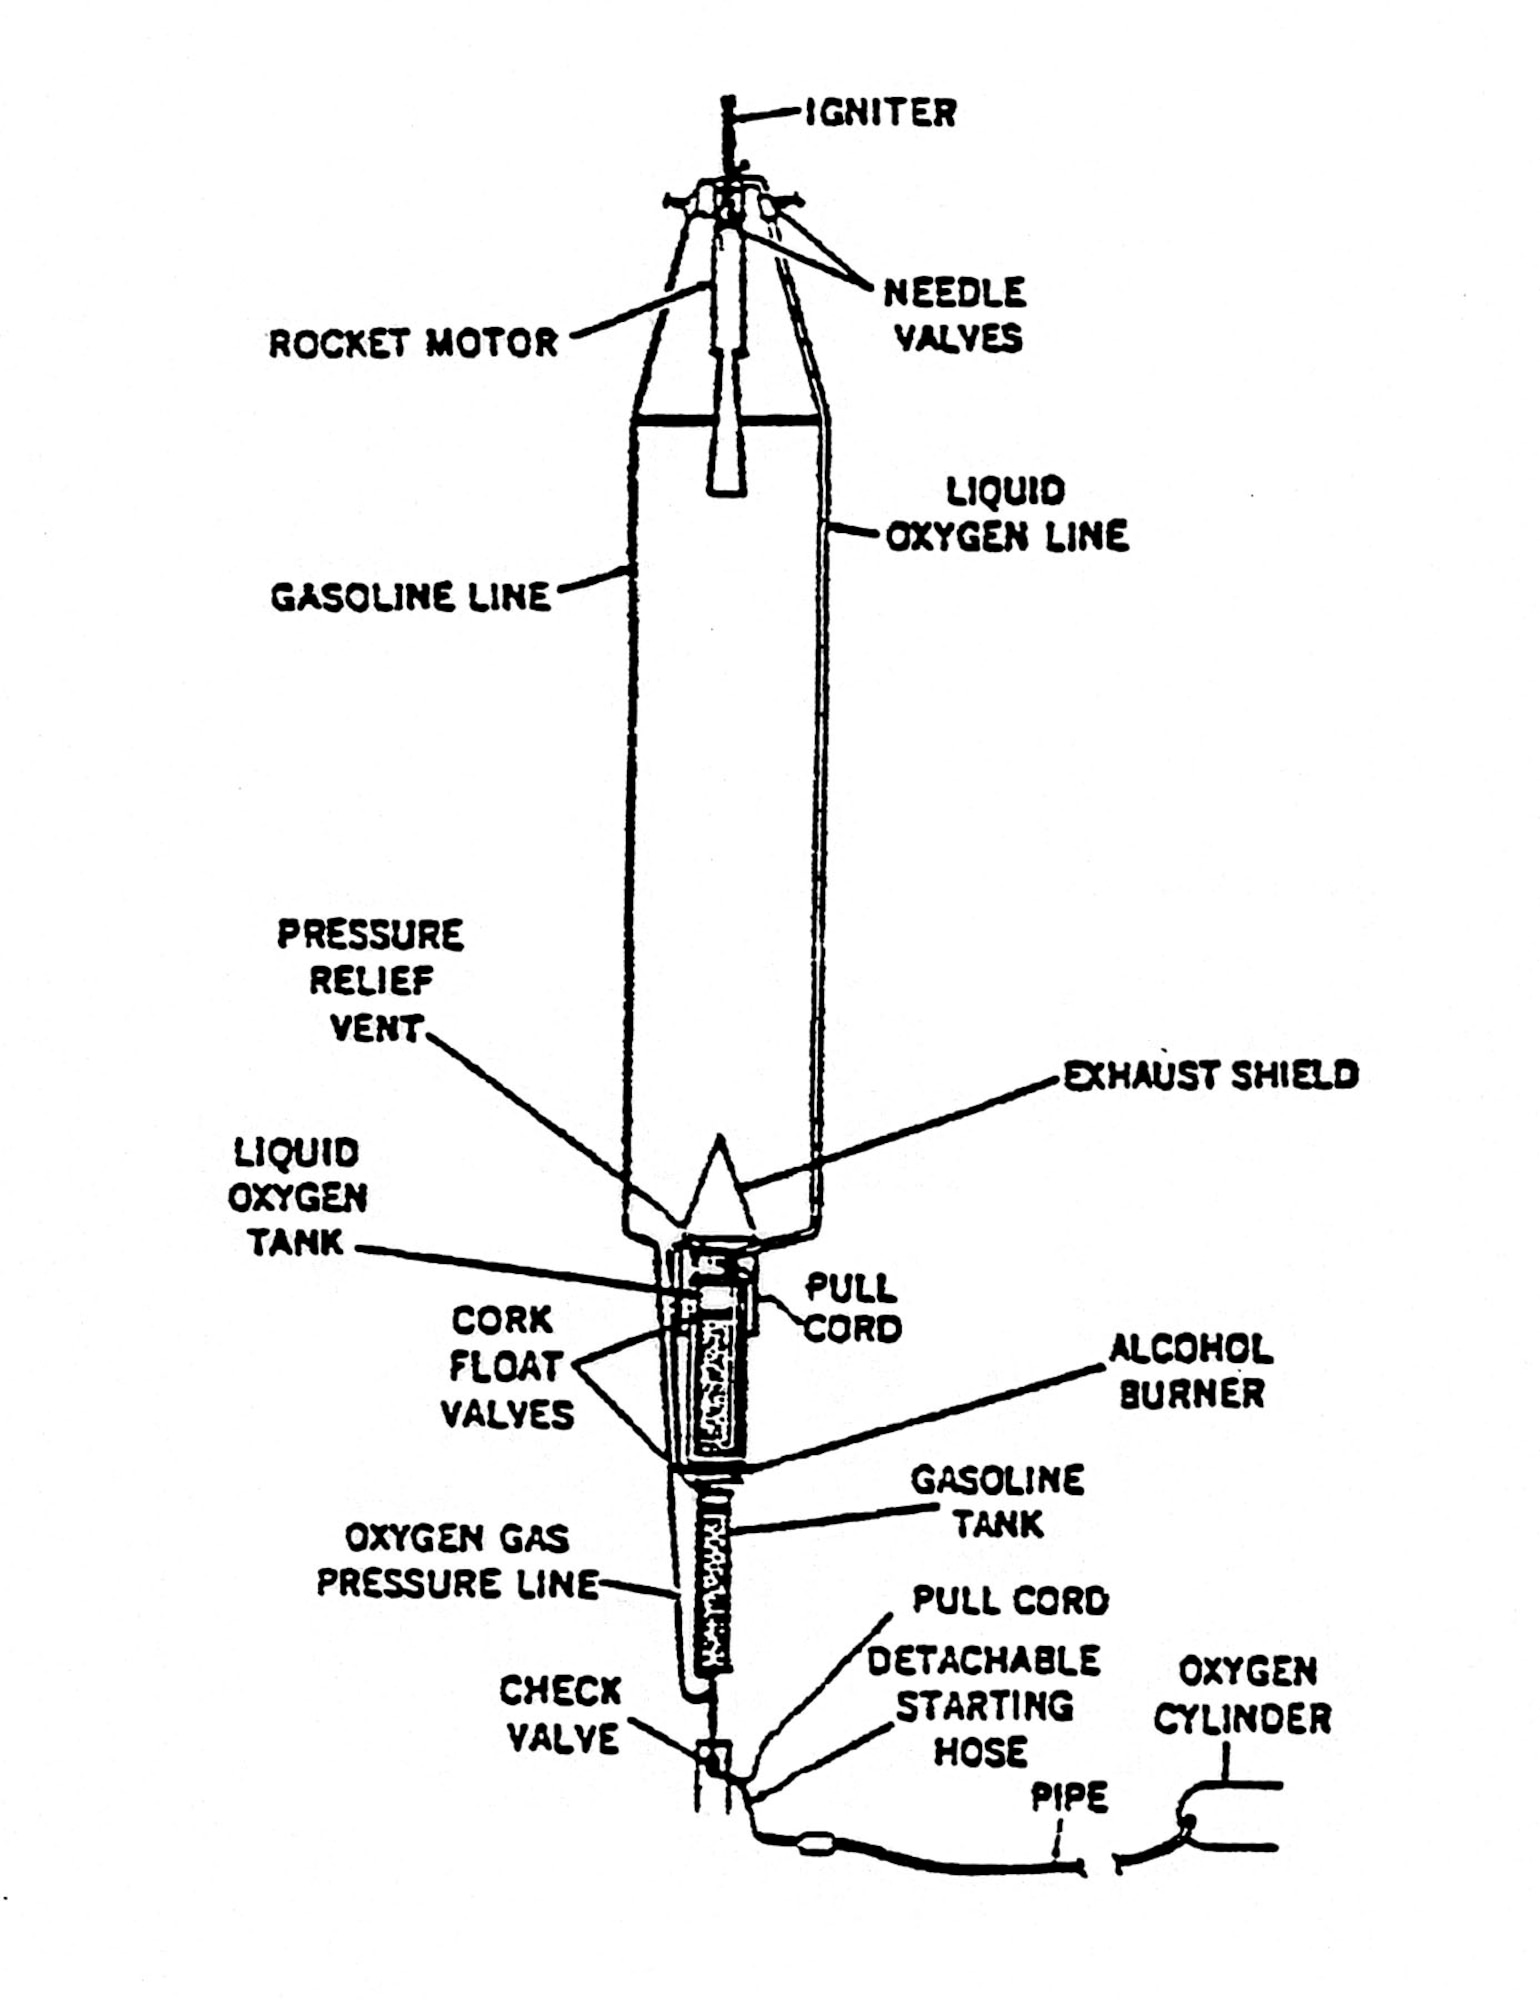 The first liquid-fueled rocket featured the thrust chamber and nozzle located above the fuel supply, with gasoline and liquid oxygen fed to the engine by tubes forming the rocket’s frame. (U.S. Air Force photo)